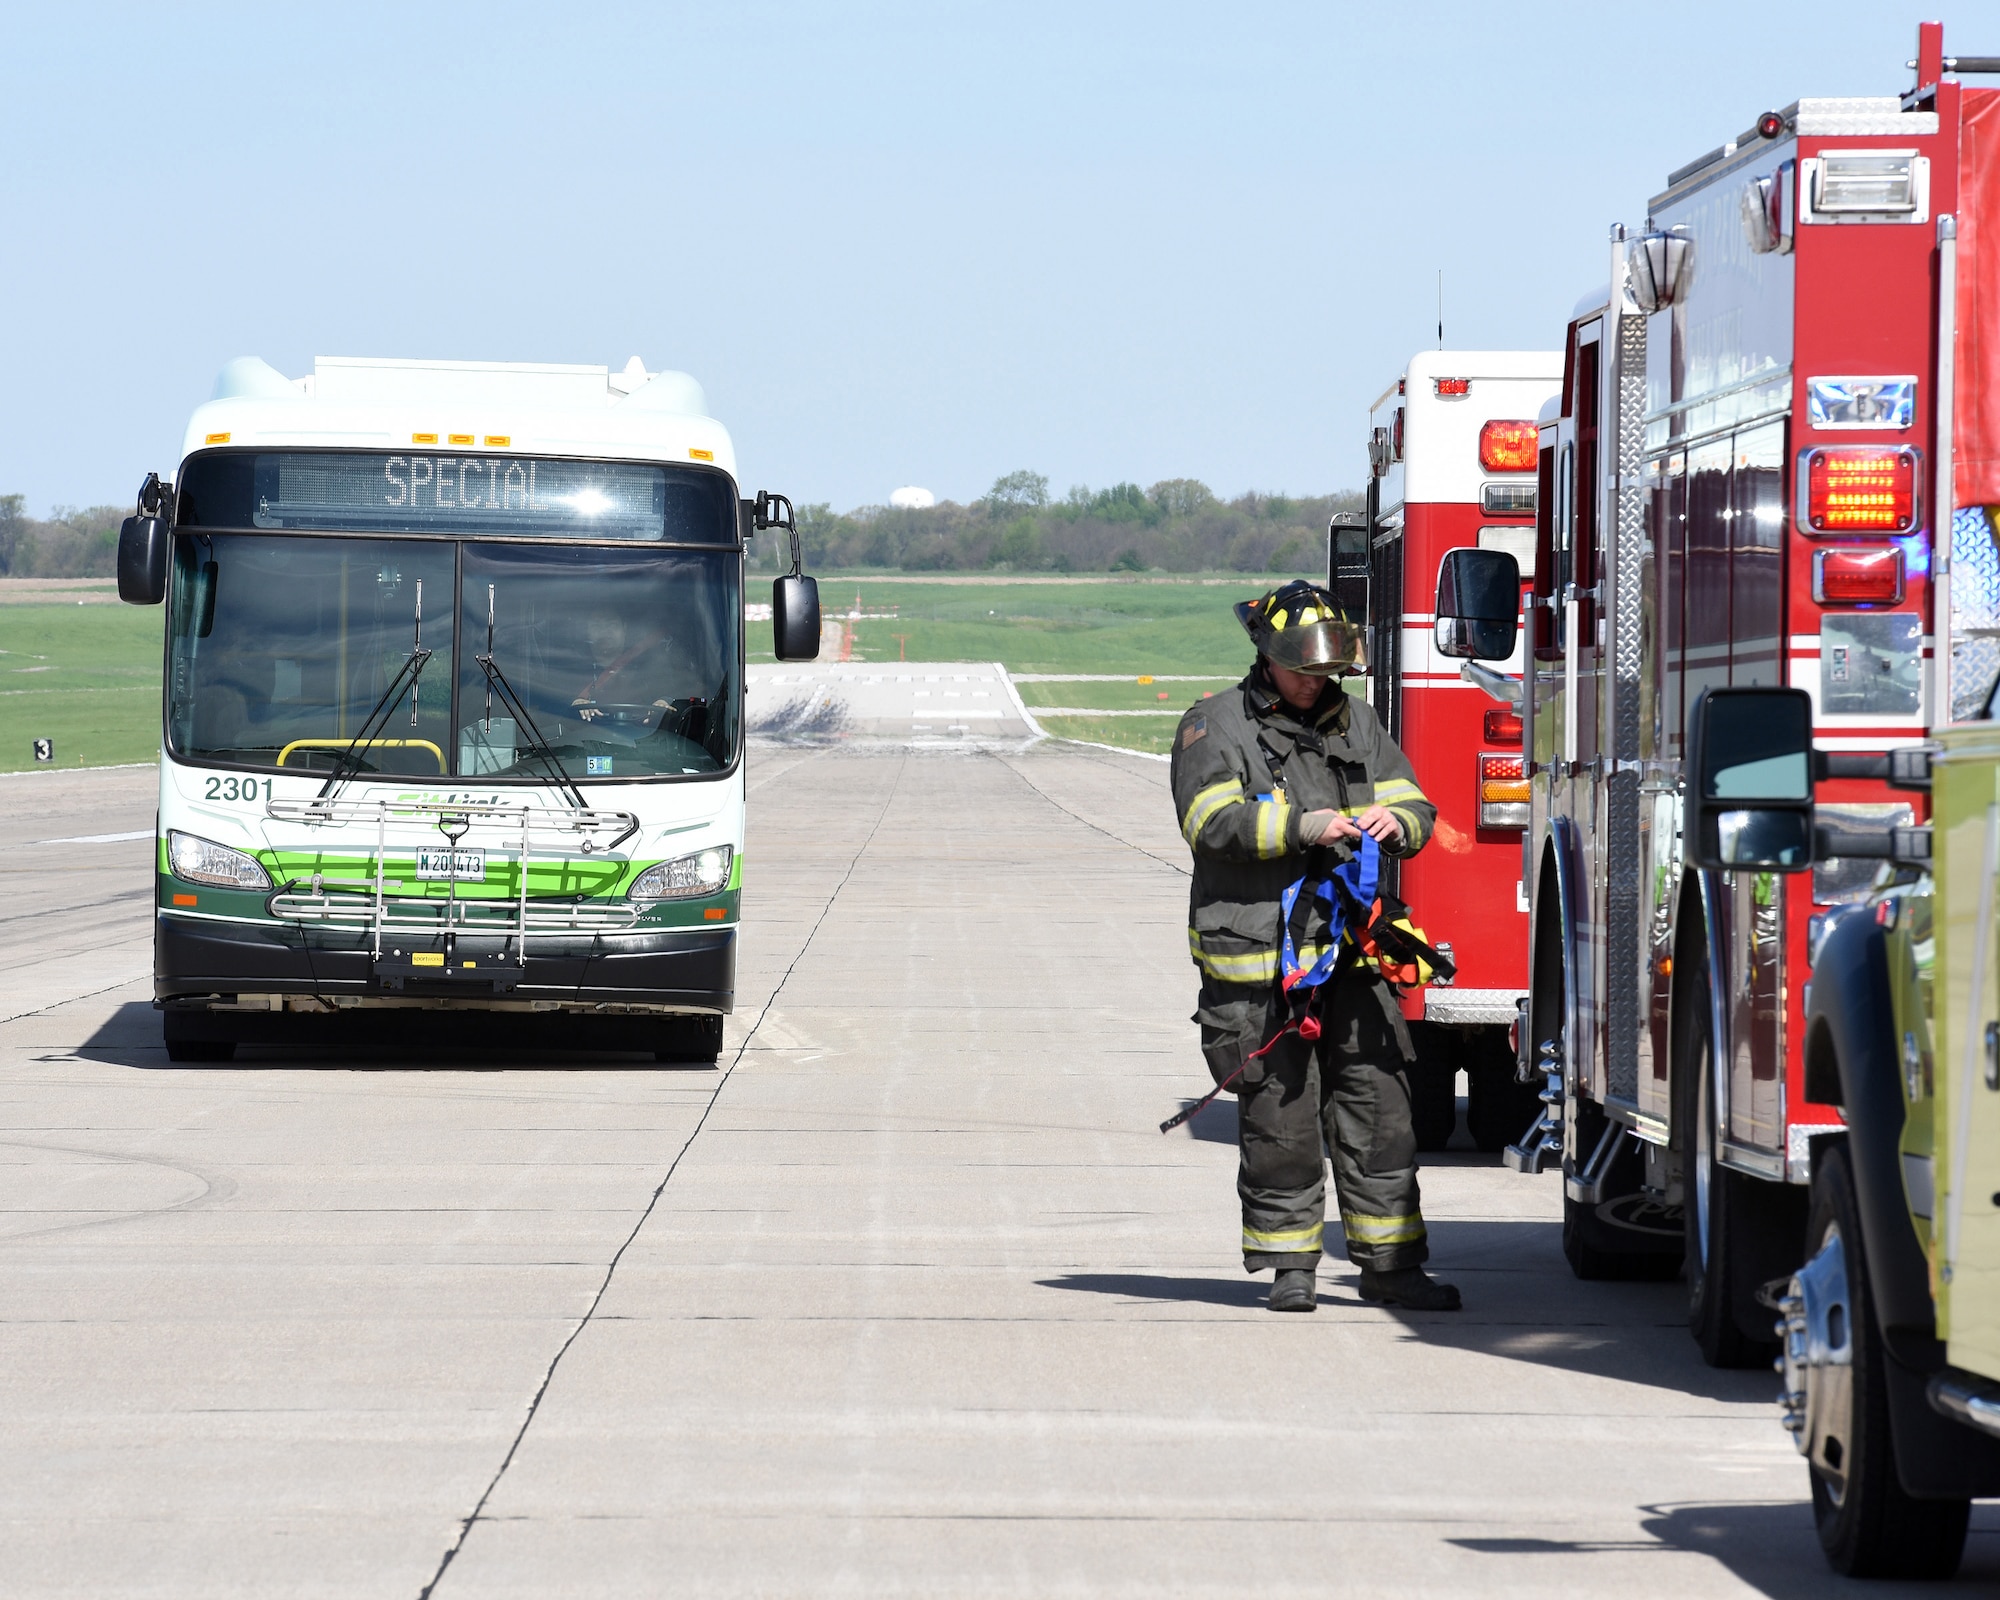 The Greater Peoria Mass Transit District supplied CityLink busses to transport mock patients from the General Wayne A. Downing Peoria International Airport to area hospitals during a simulated aircraft crash in Peoria, Ill. April 22, 2017. Thirty-eight agencies and more than 200 exercise participants took part in the full-scale mass casualty exercise. (U.S. Air National Guard photo by Master Sgt. Todd Pendleton)